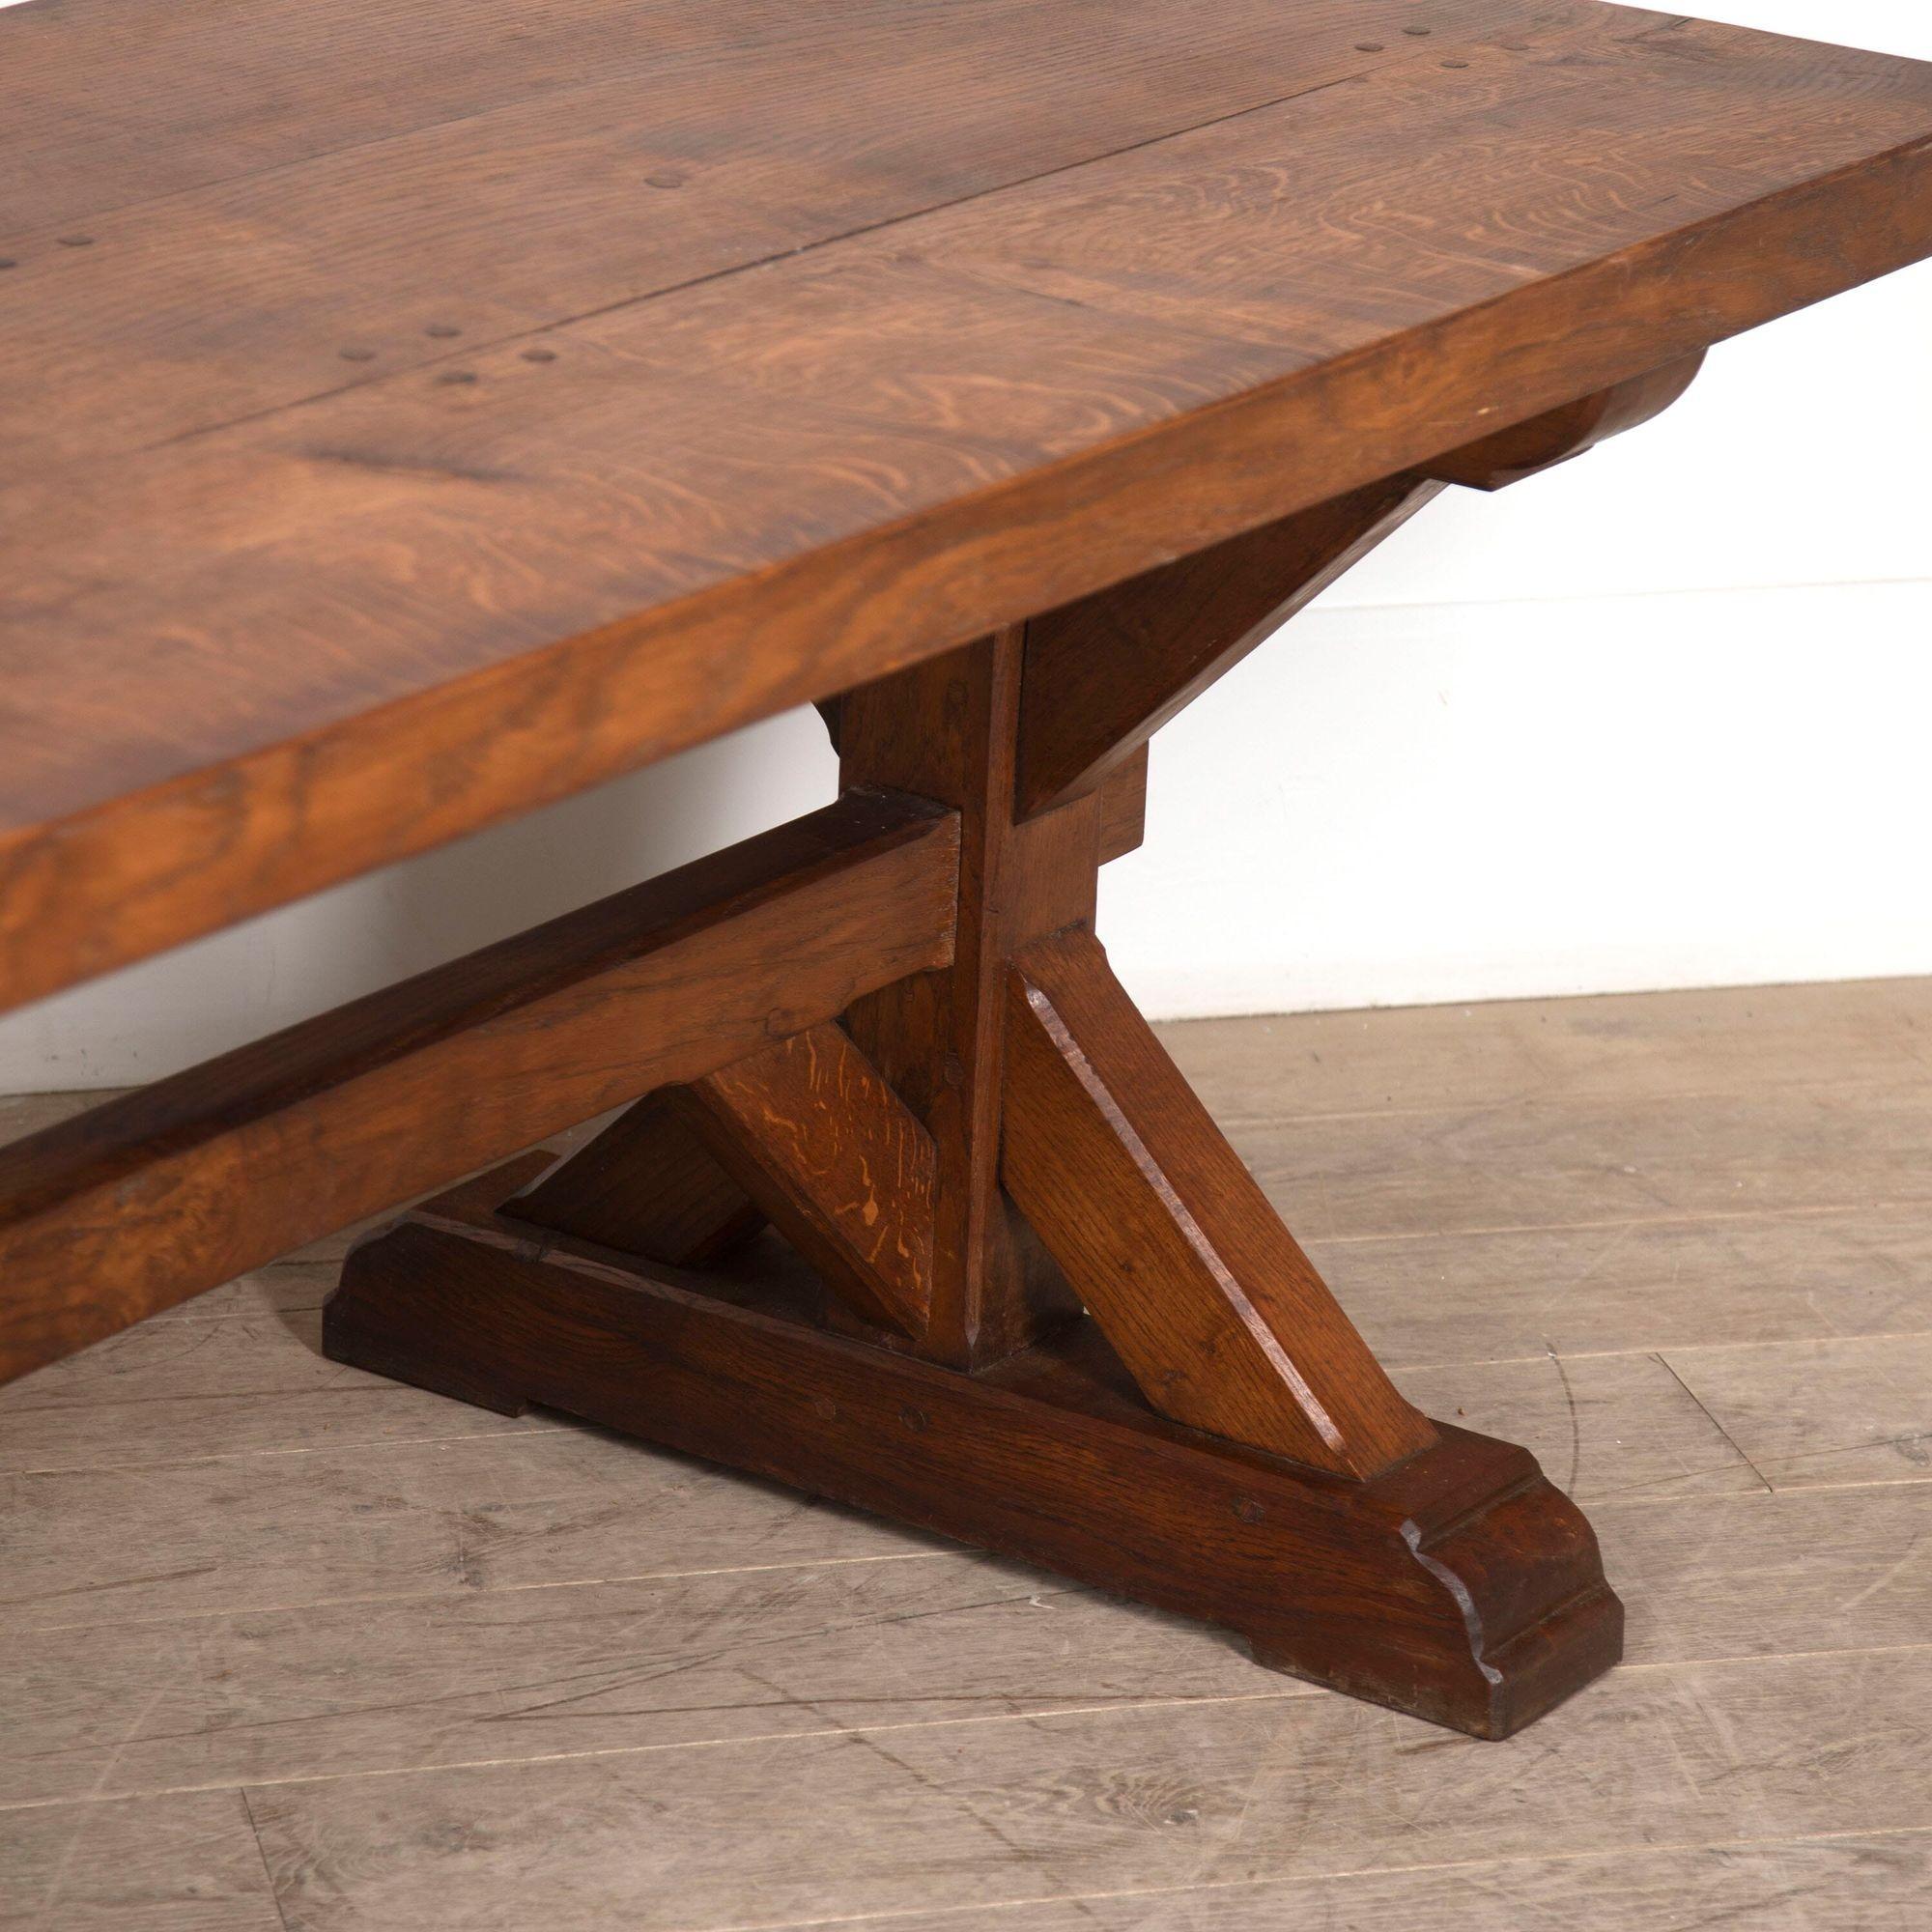 Superb 19th century oak dining table of great quality.
This table features a very bold, gothic design with an X frame.
Features a three plank top with a gorgeous golden colour. There is a minor warp the top but once in the pegs it sits solid. The